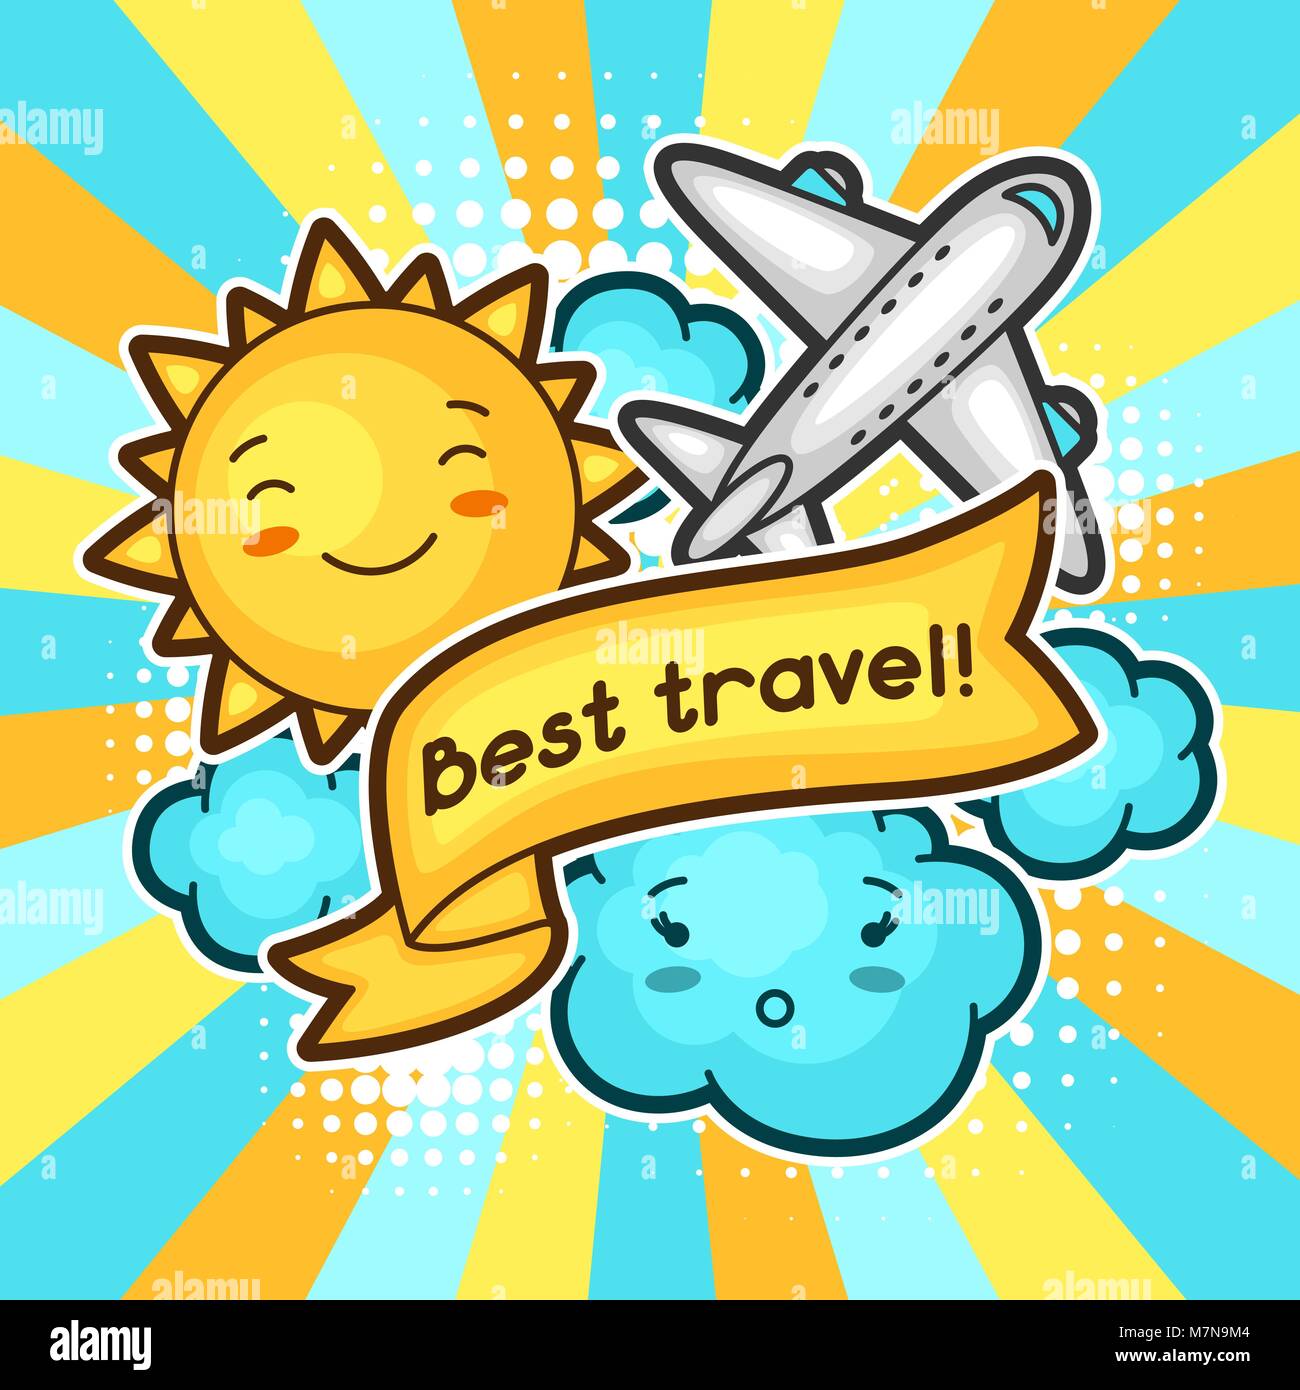 Cute travel background with kawaii doodles. Summer collection of cheerful cartoon characters sun, airplane, cloud and decorative objects Stock Vector